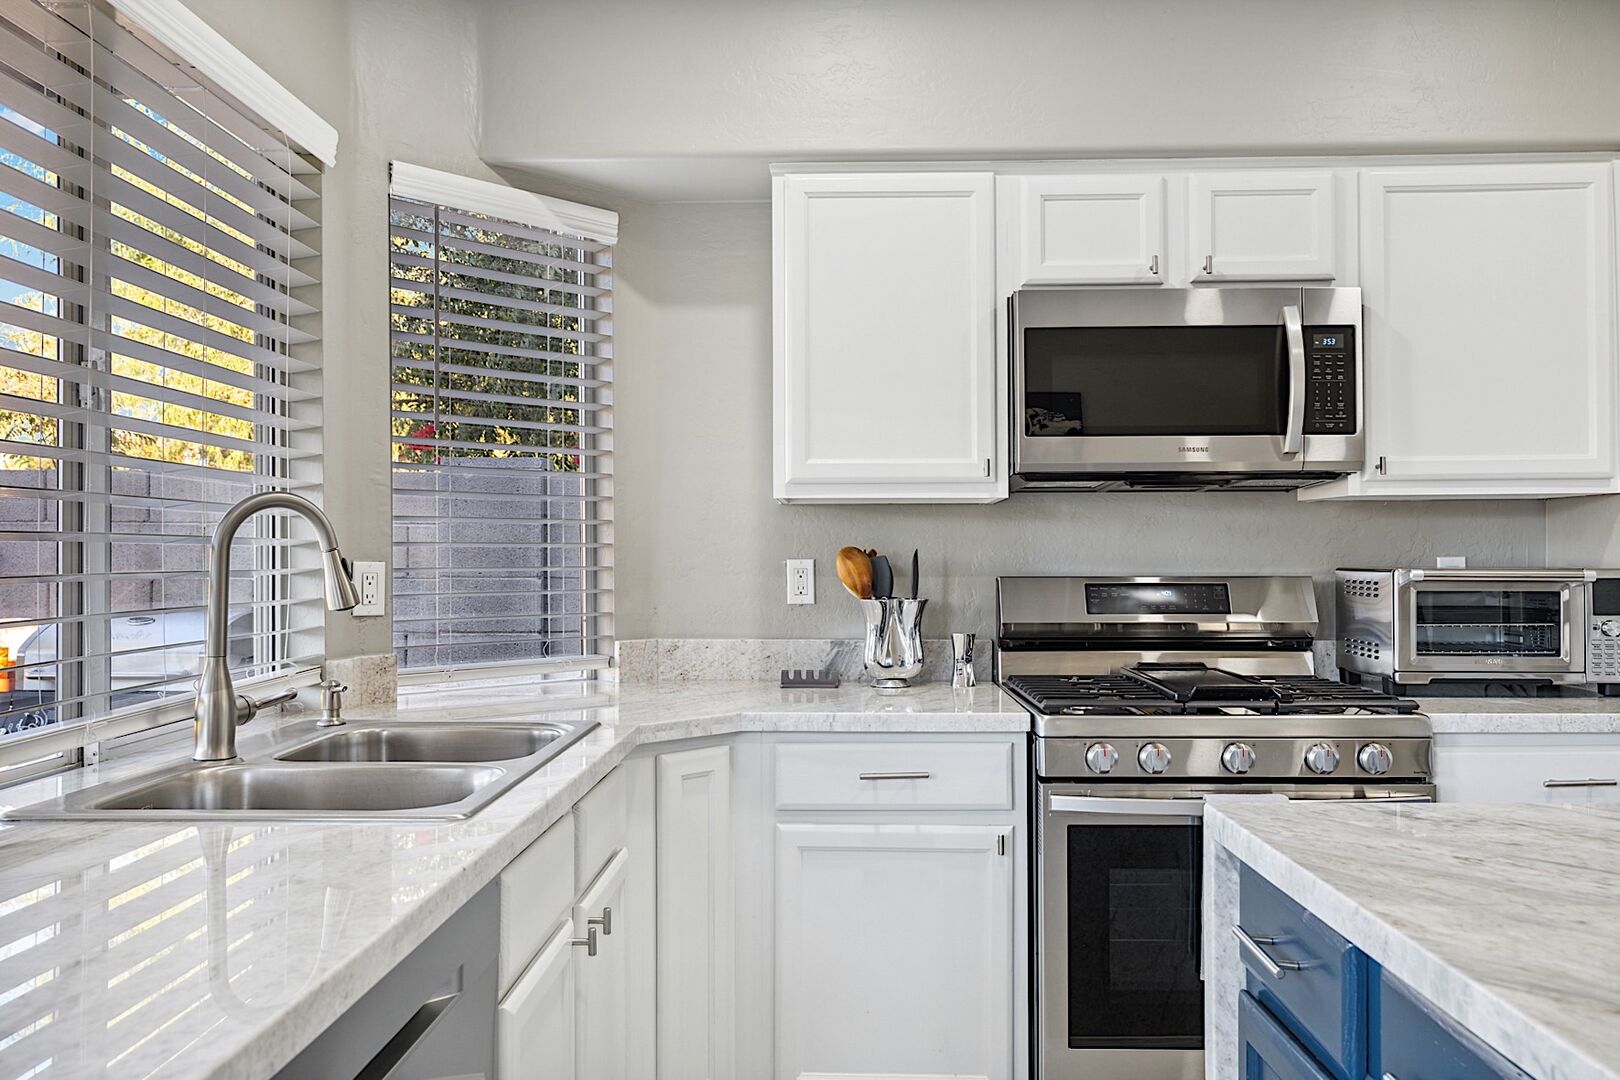 Kitchen w/ beautiful quartz countertops, stainless steel appliances and tile flooring